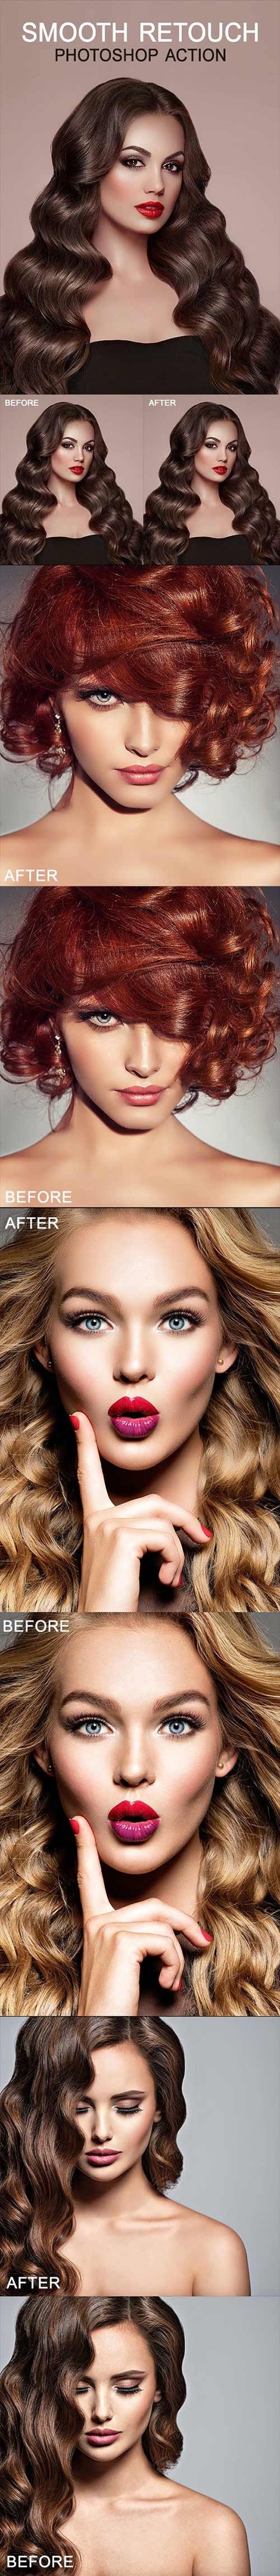 SMOOTH RETOUCH Photoshop Action 23019627